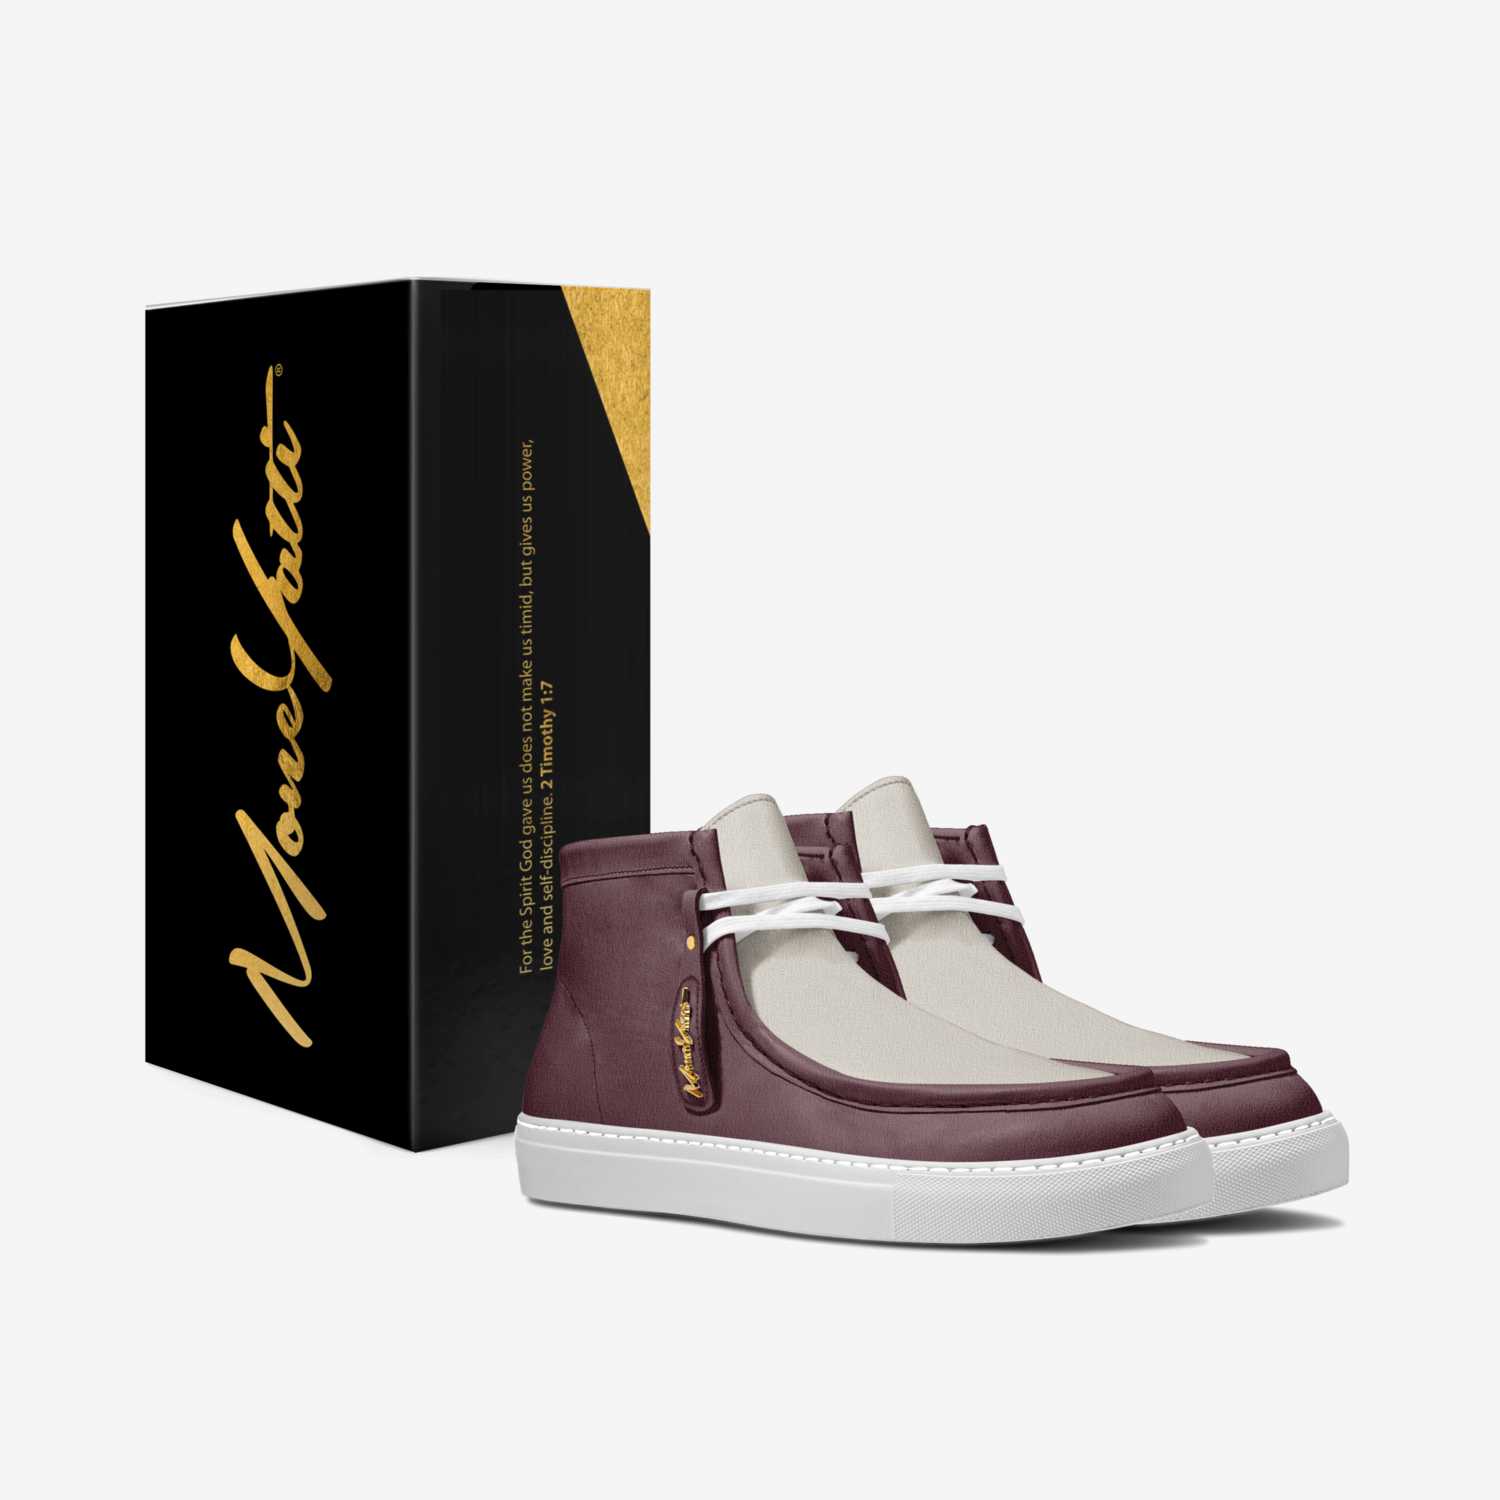 LUX SUEDE 2TONE 01 custom made in Italy shoes by Moneyatti Brand | Box view